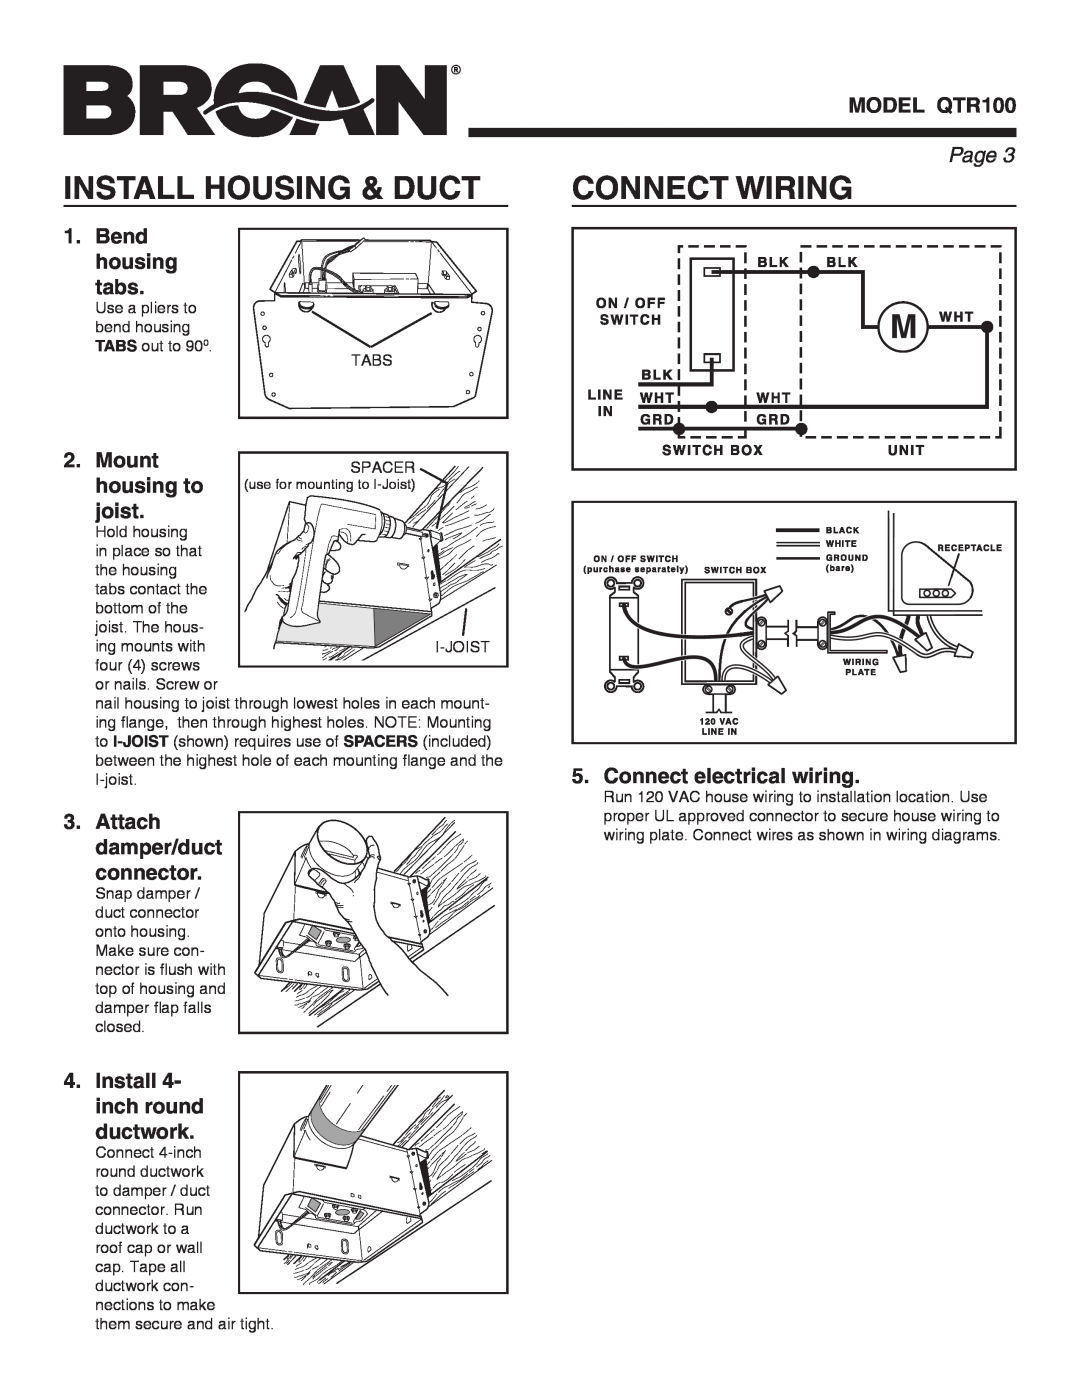 Broan QTR100 warranty Install Housing & Duct, Connect Wiring, Page  